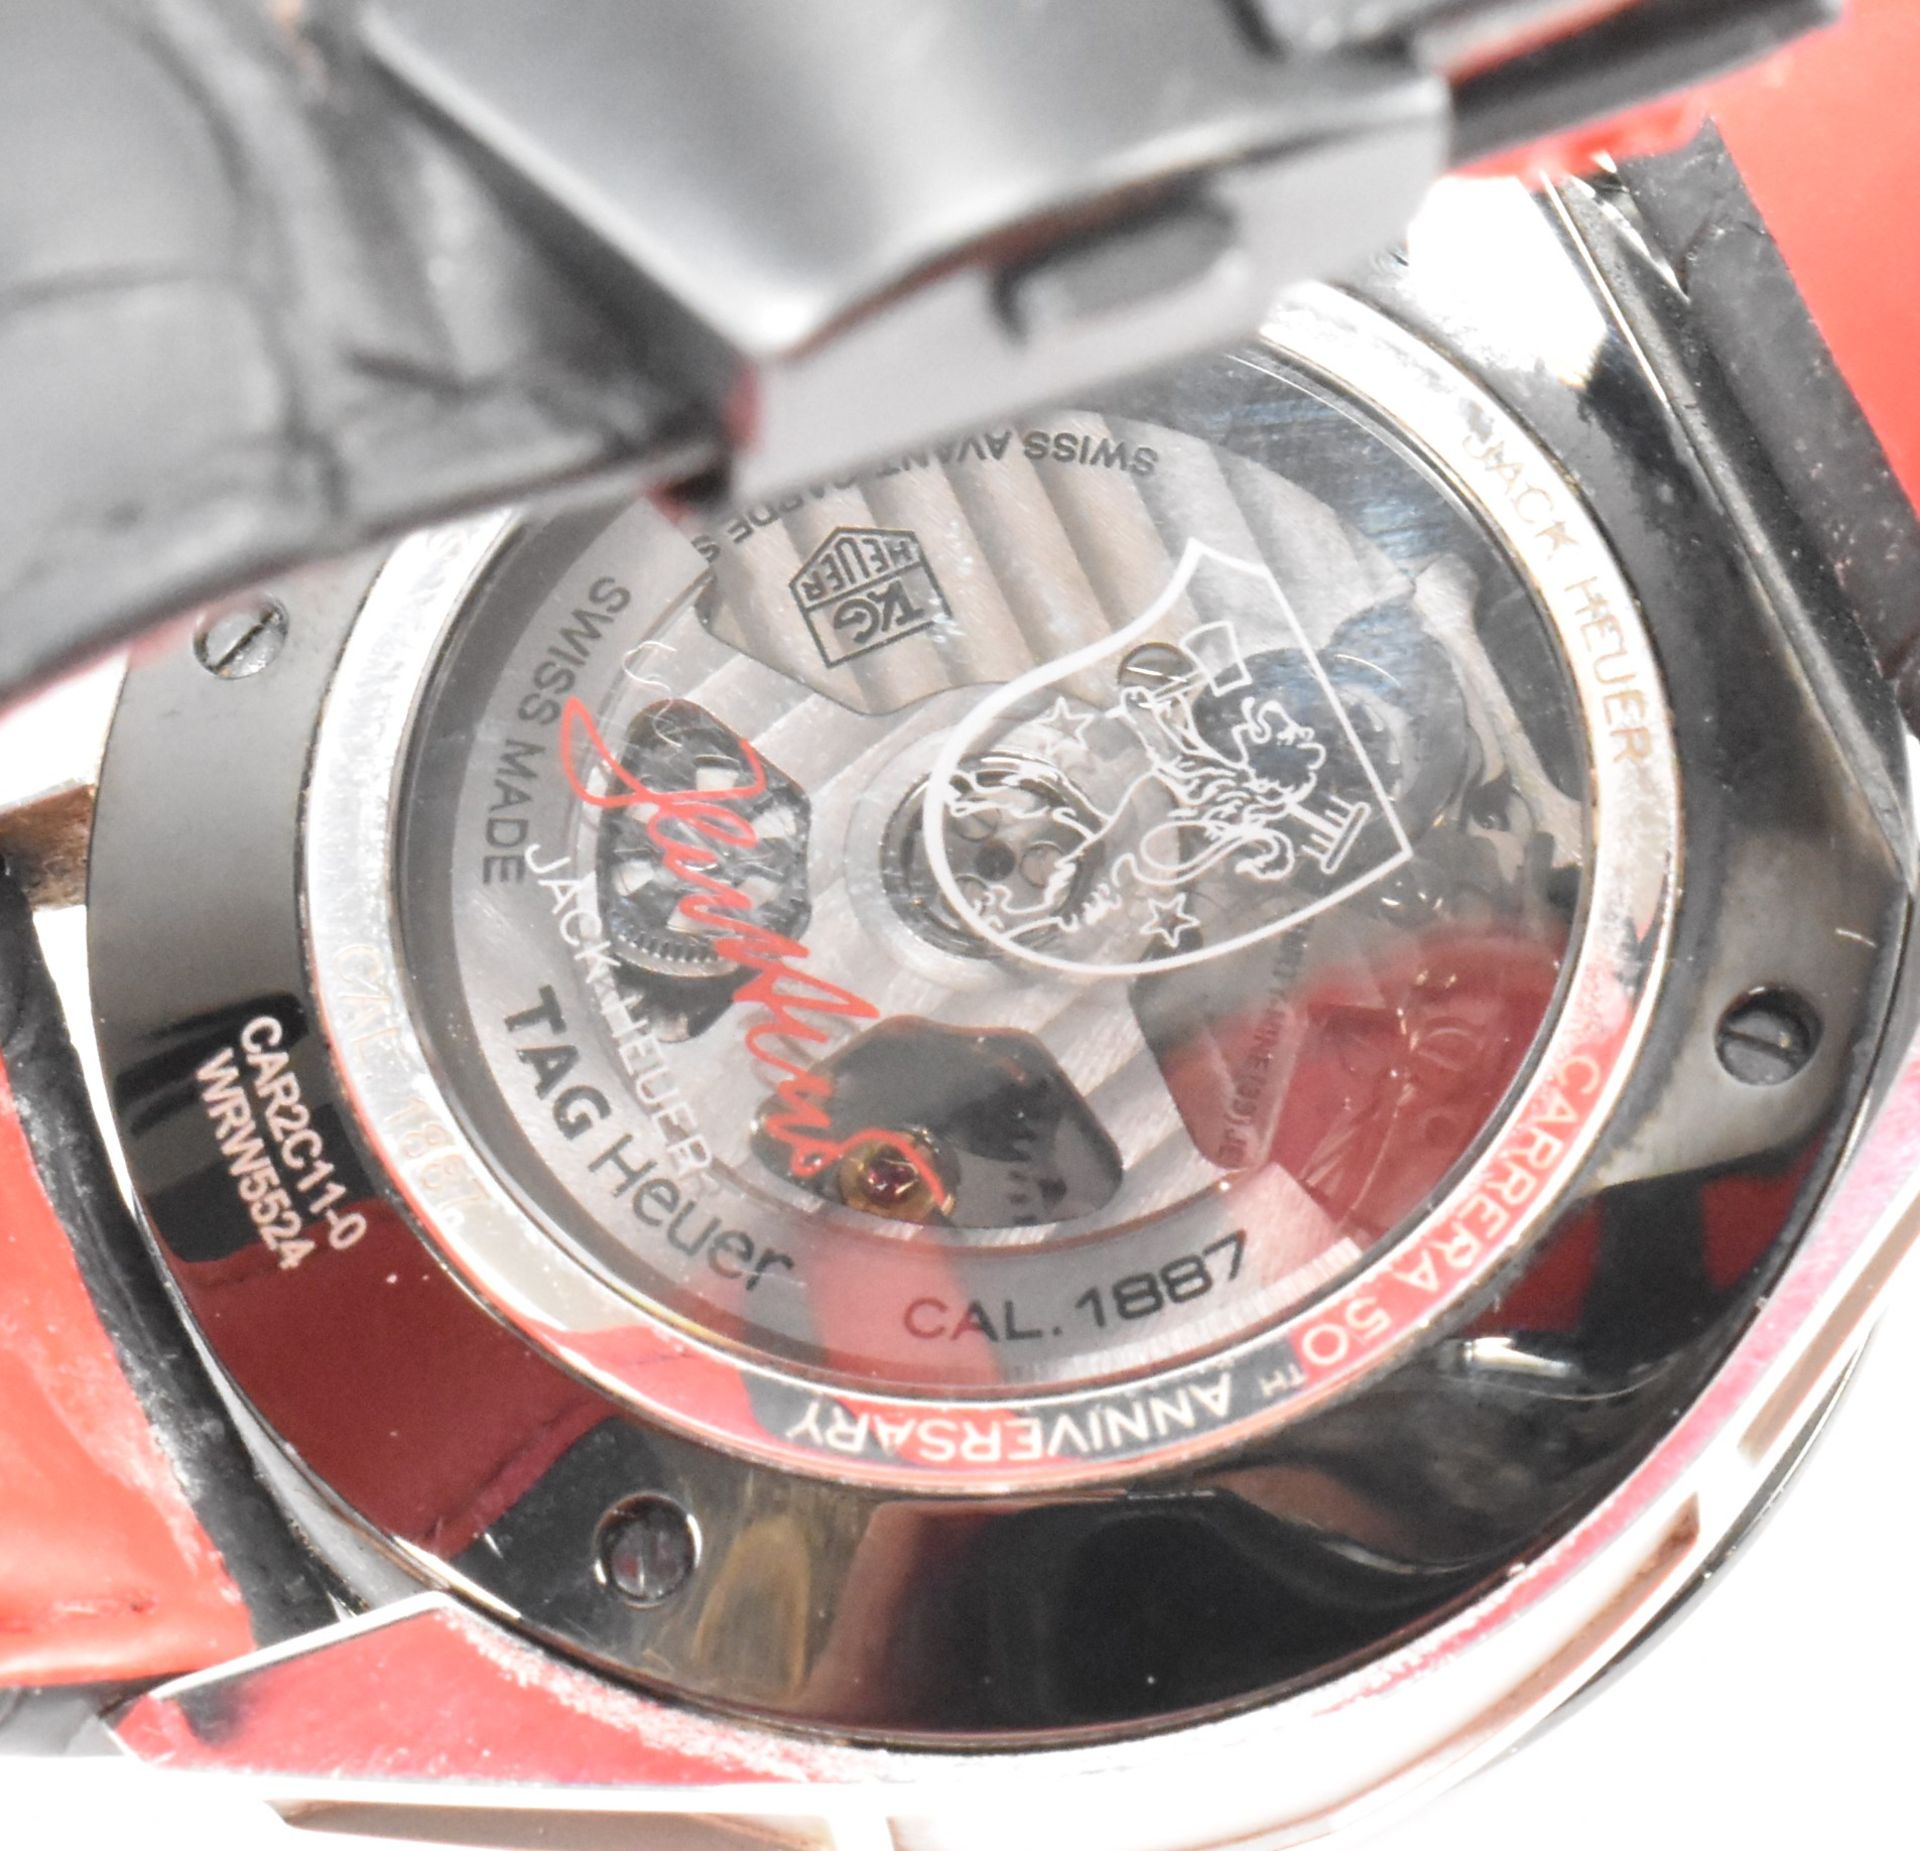 TAG HEUER CARRERA 50TH ANNIVERSARY LIMITED EDITION WATCH - Image 4 of 5